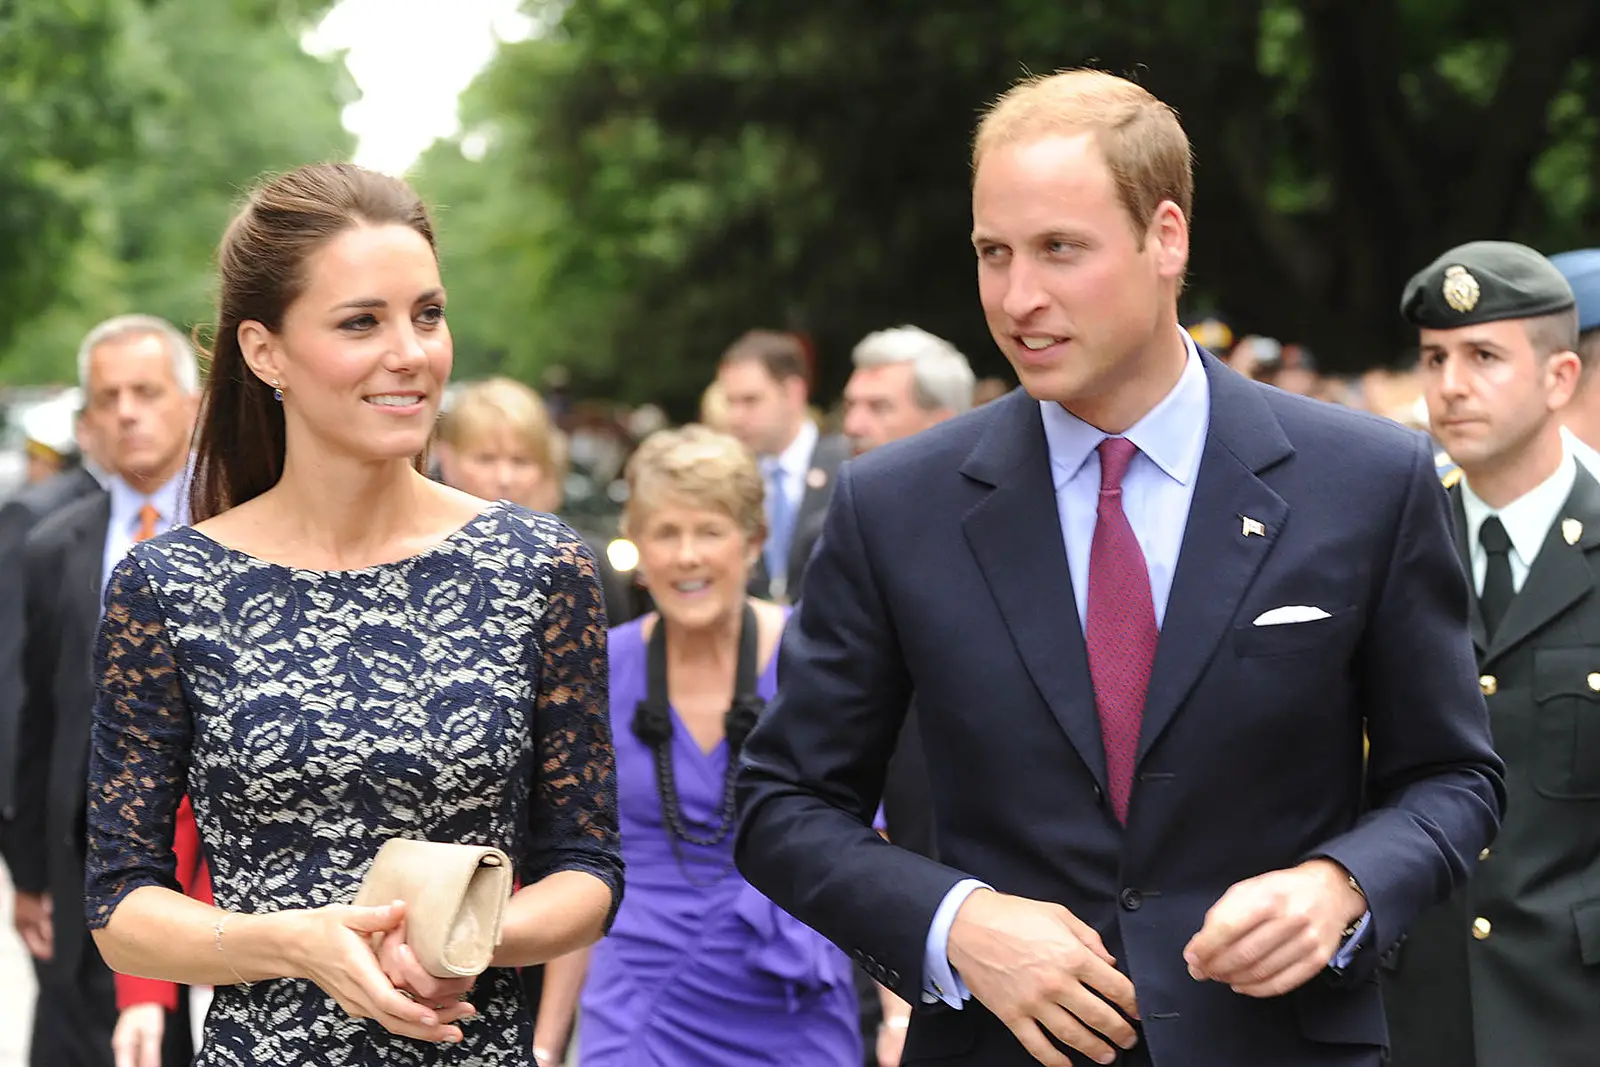 The Duke and Duchess of cambridge received a warm welcome at Rideau Hall in Ottawa during Royal tour in 2011